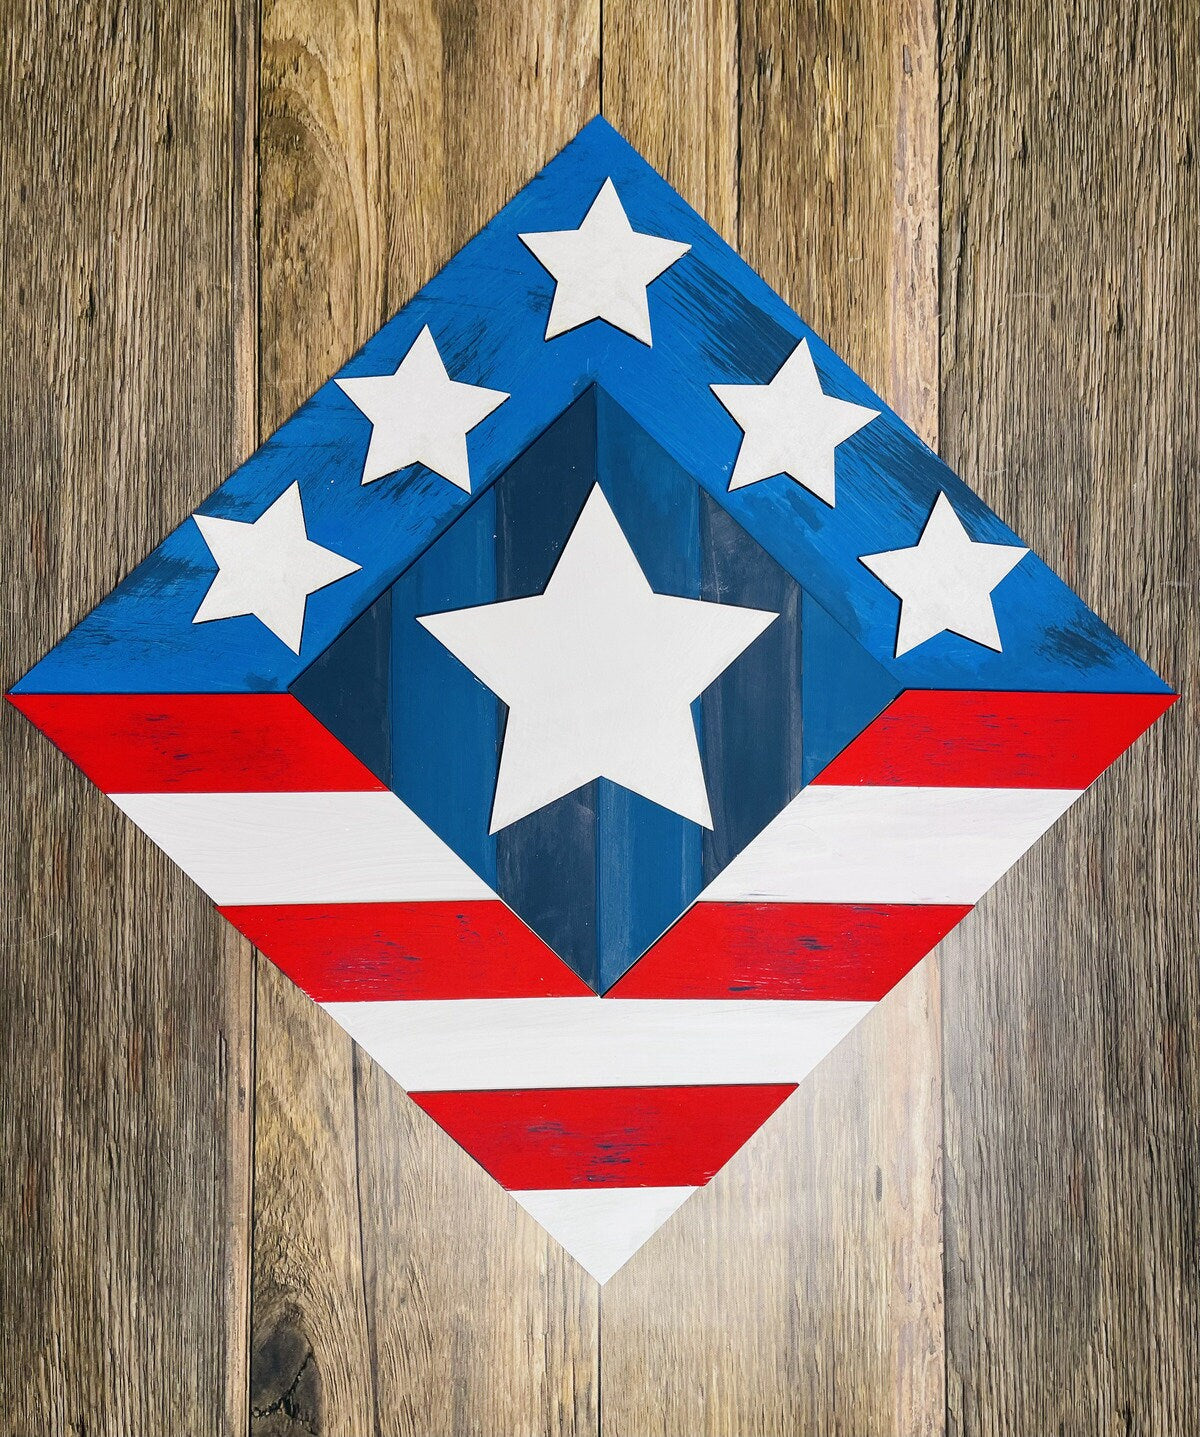 Patriotic Red White and Blue Painted Barn Quilt PDF Pattern